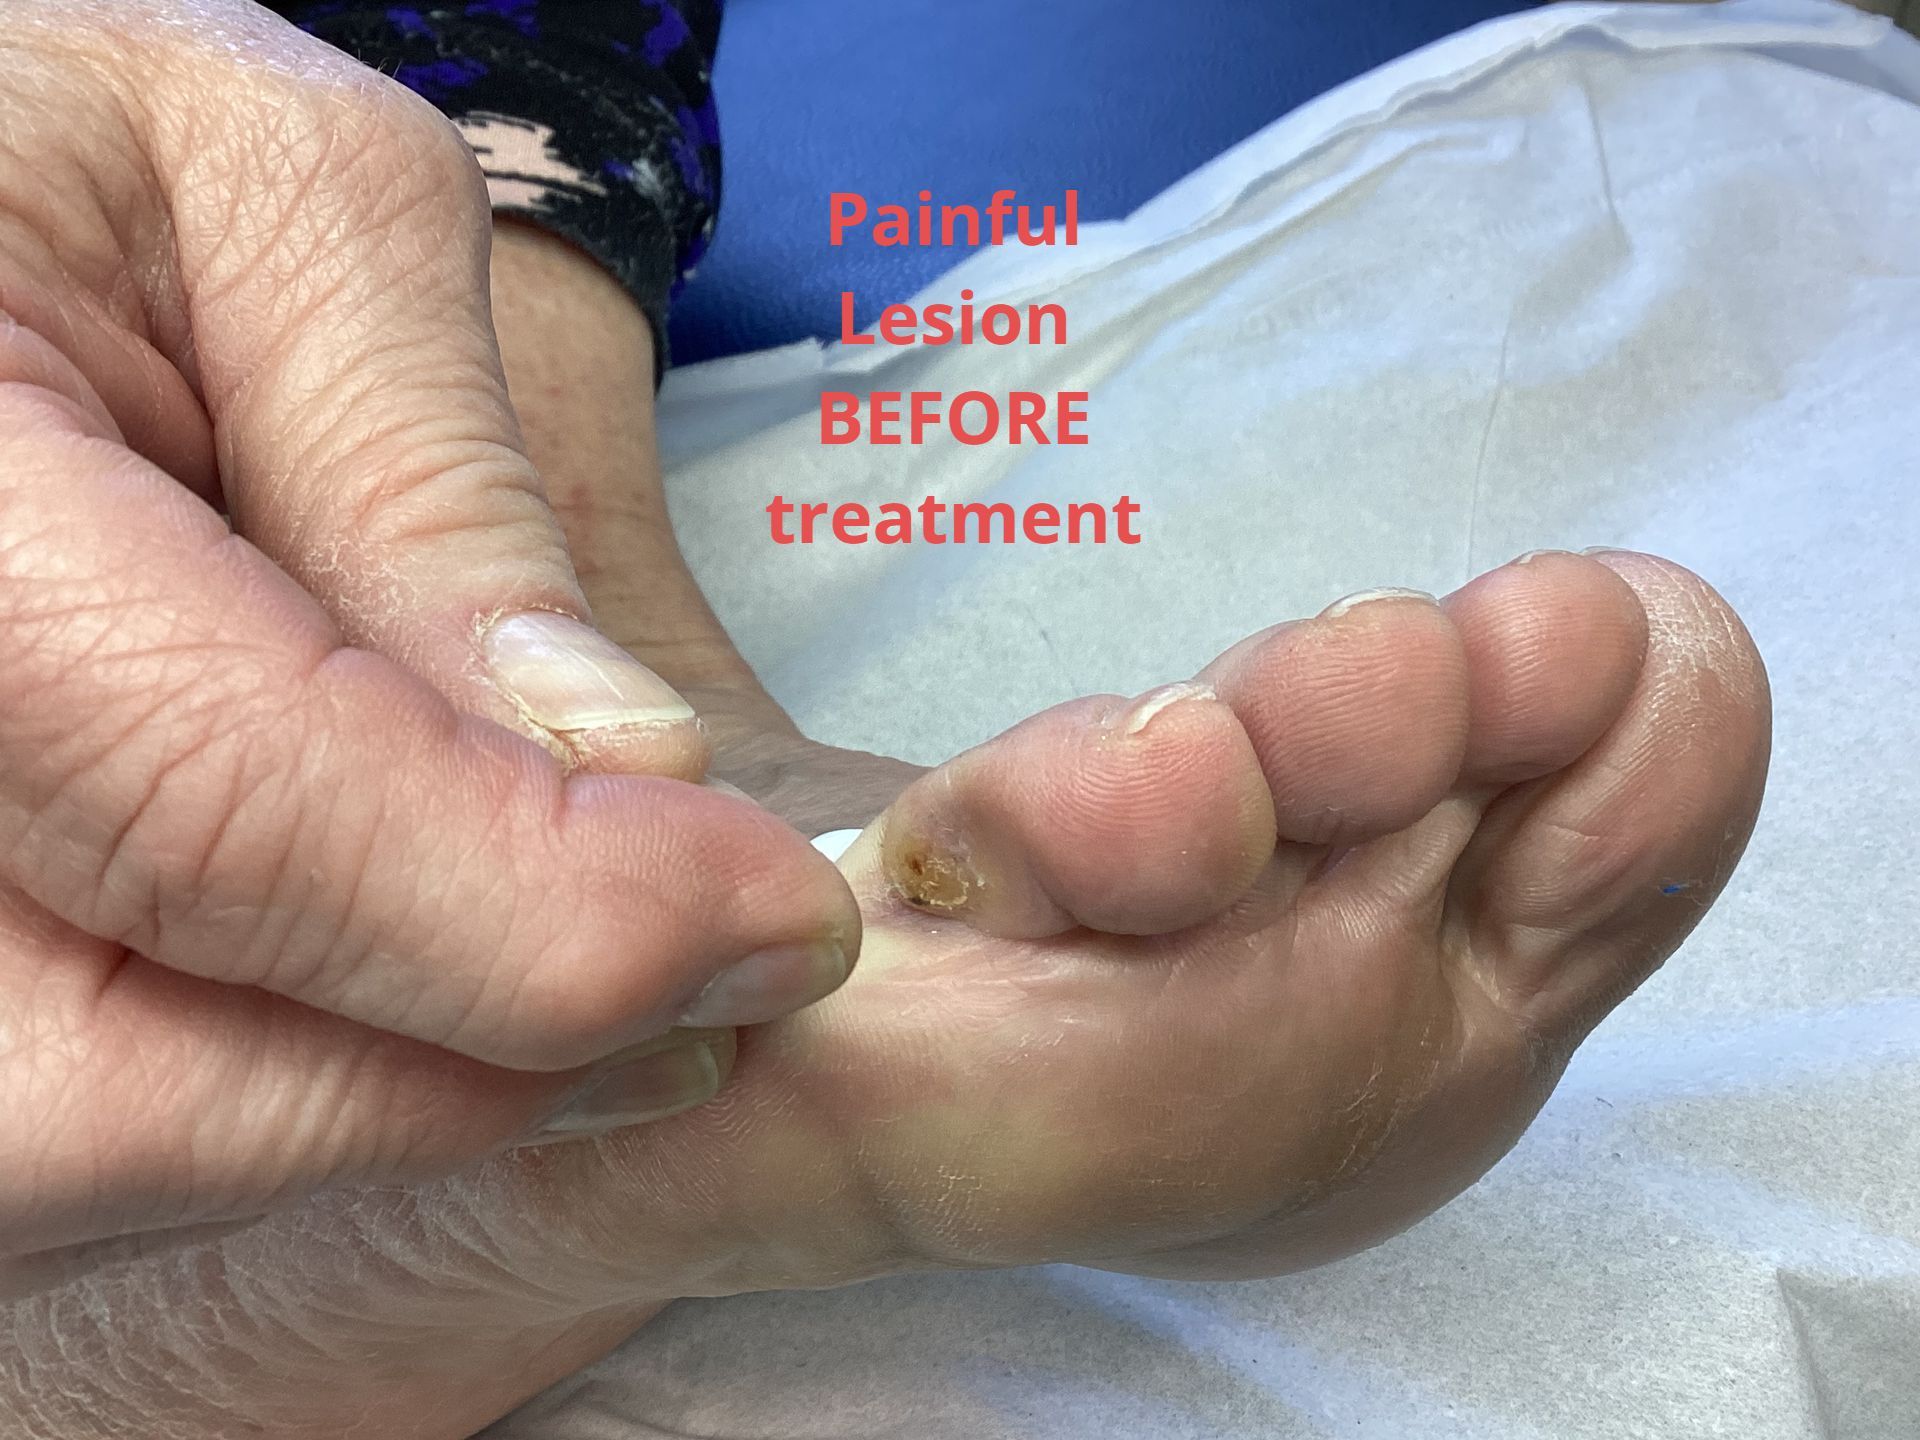 Use of Hyaluronic acid to treat painful corns at York Podiatry Ltd 